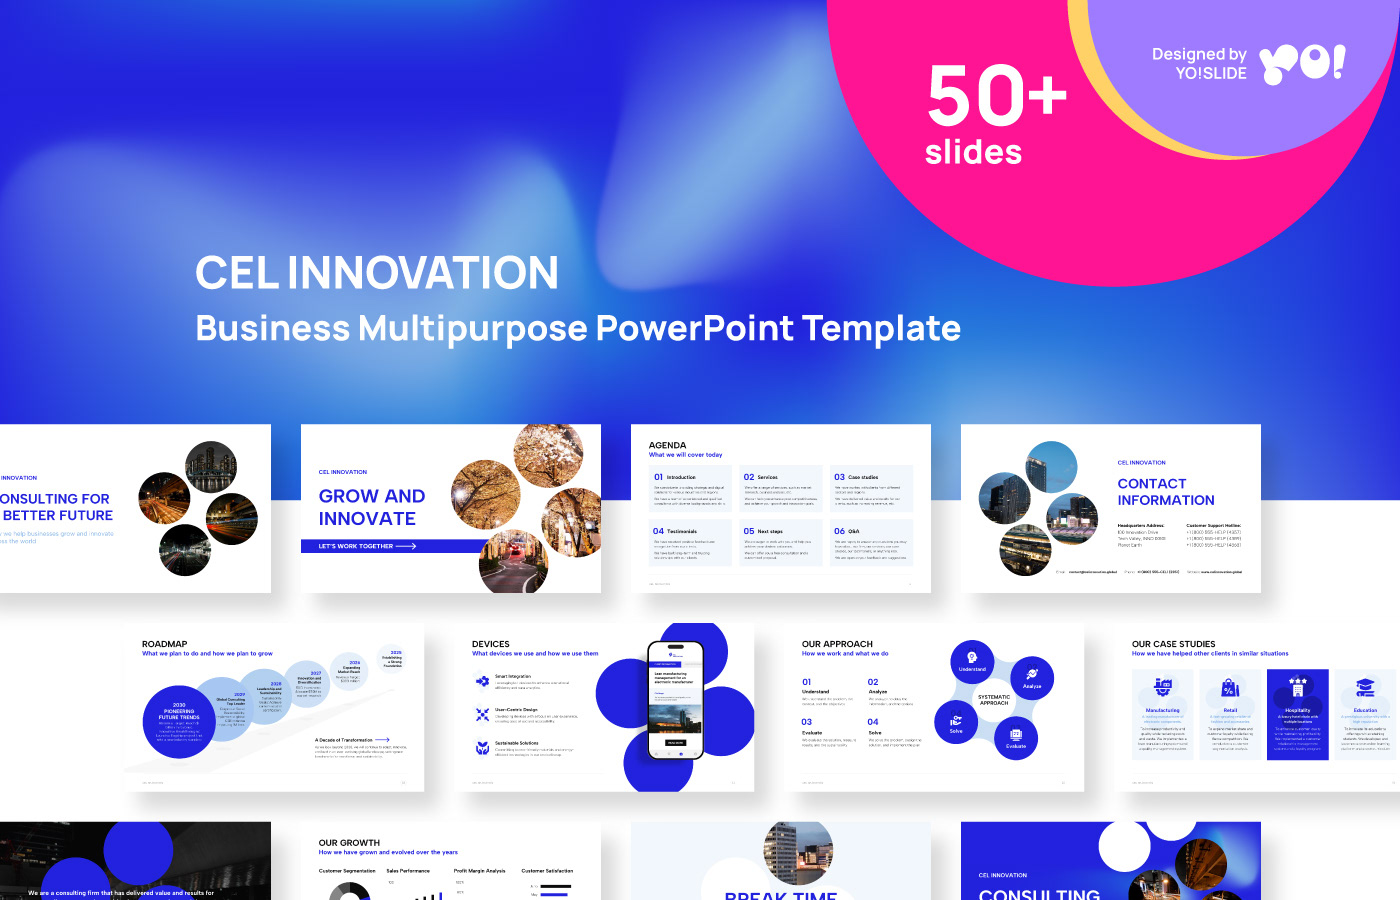 presentation presentation design PPT PPT template Powerpoint powerpoint template business Consulting innovation modern